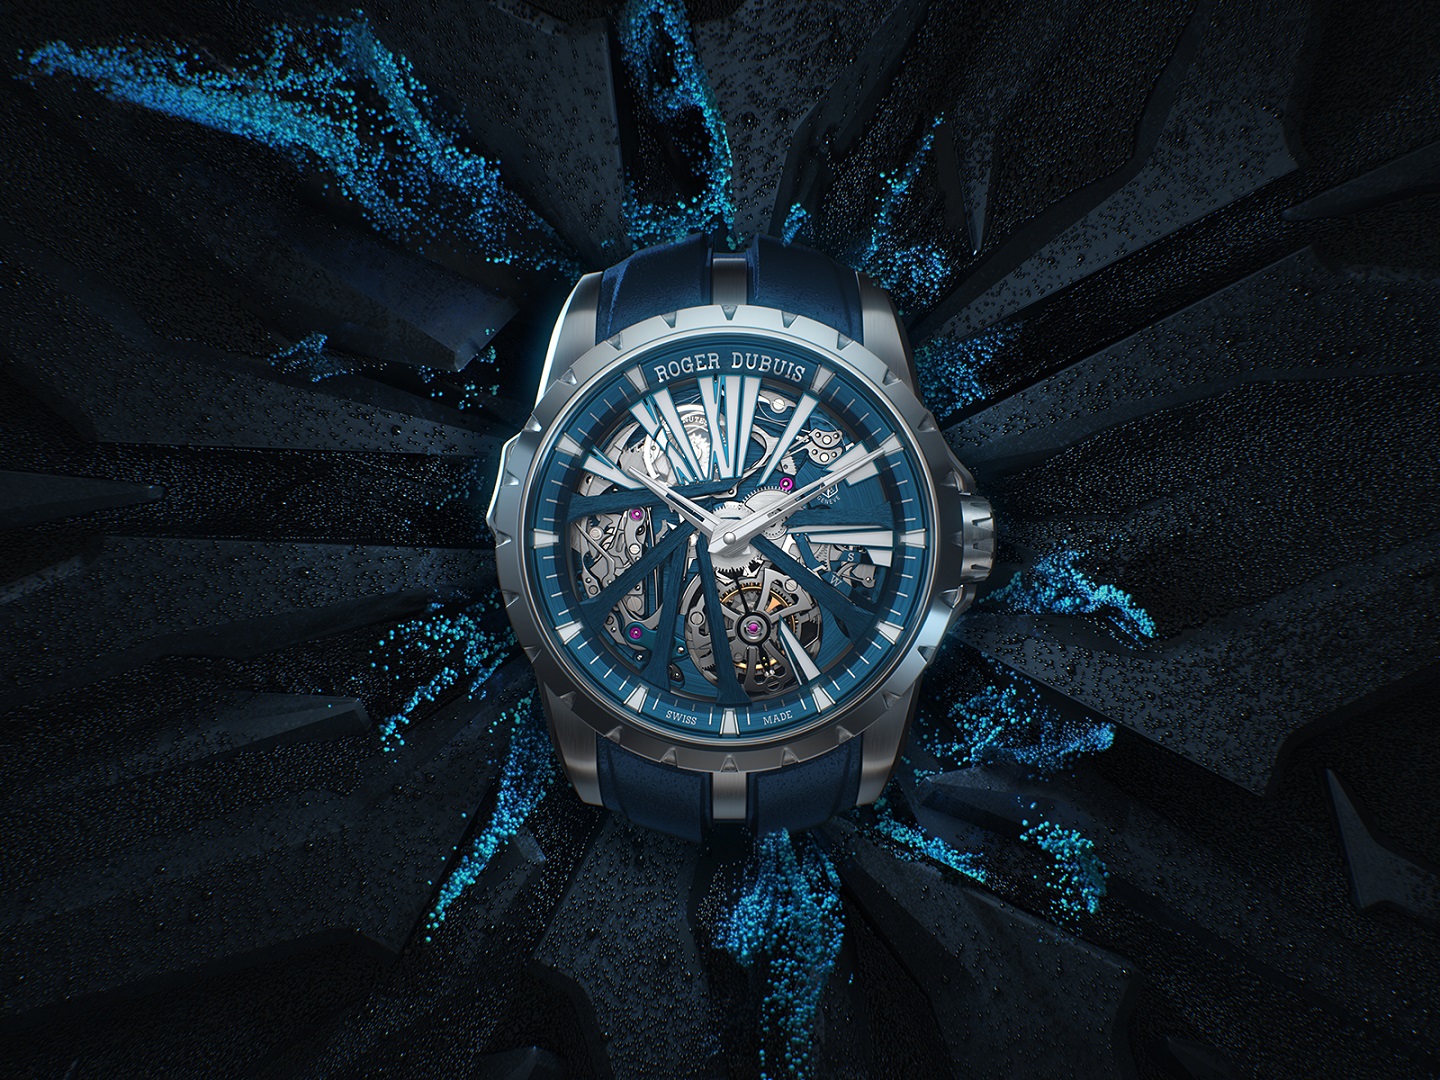 LV's Tambour Moon Flying Tourbillon Kaleidoscope is an ode to the house's  Monogram Flower introduced in 1896